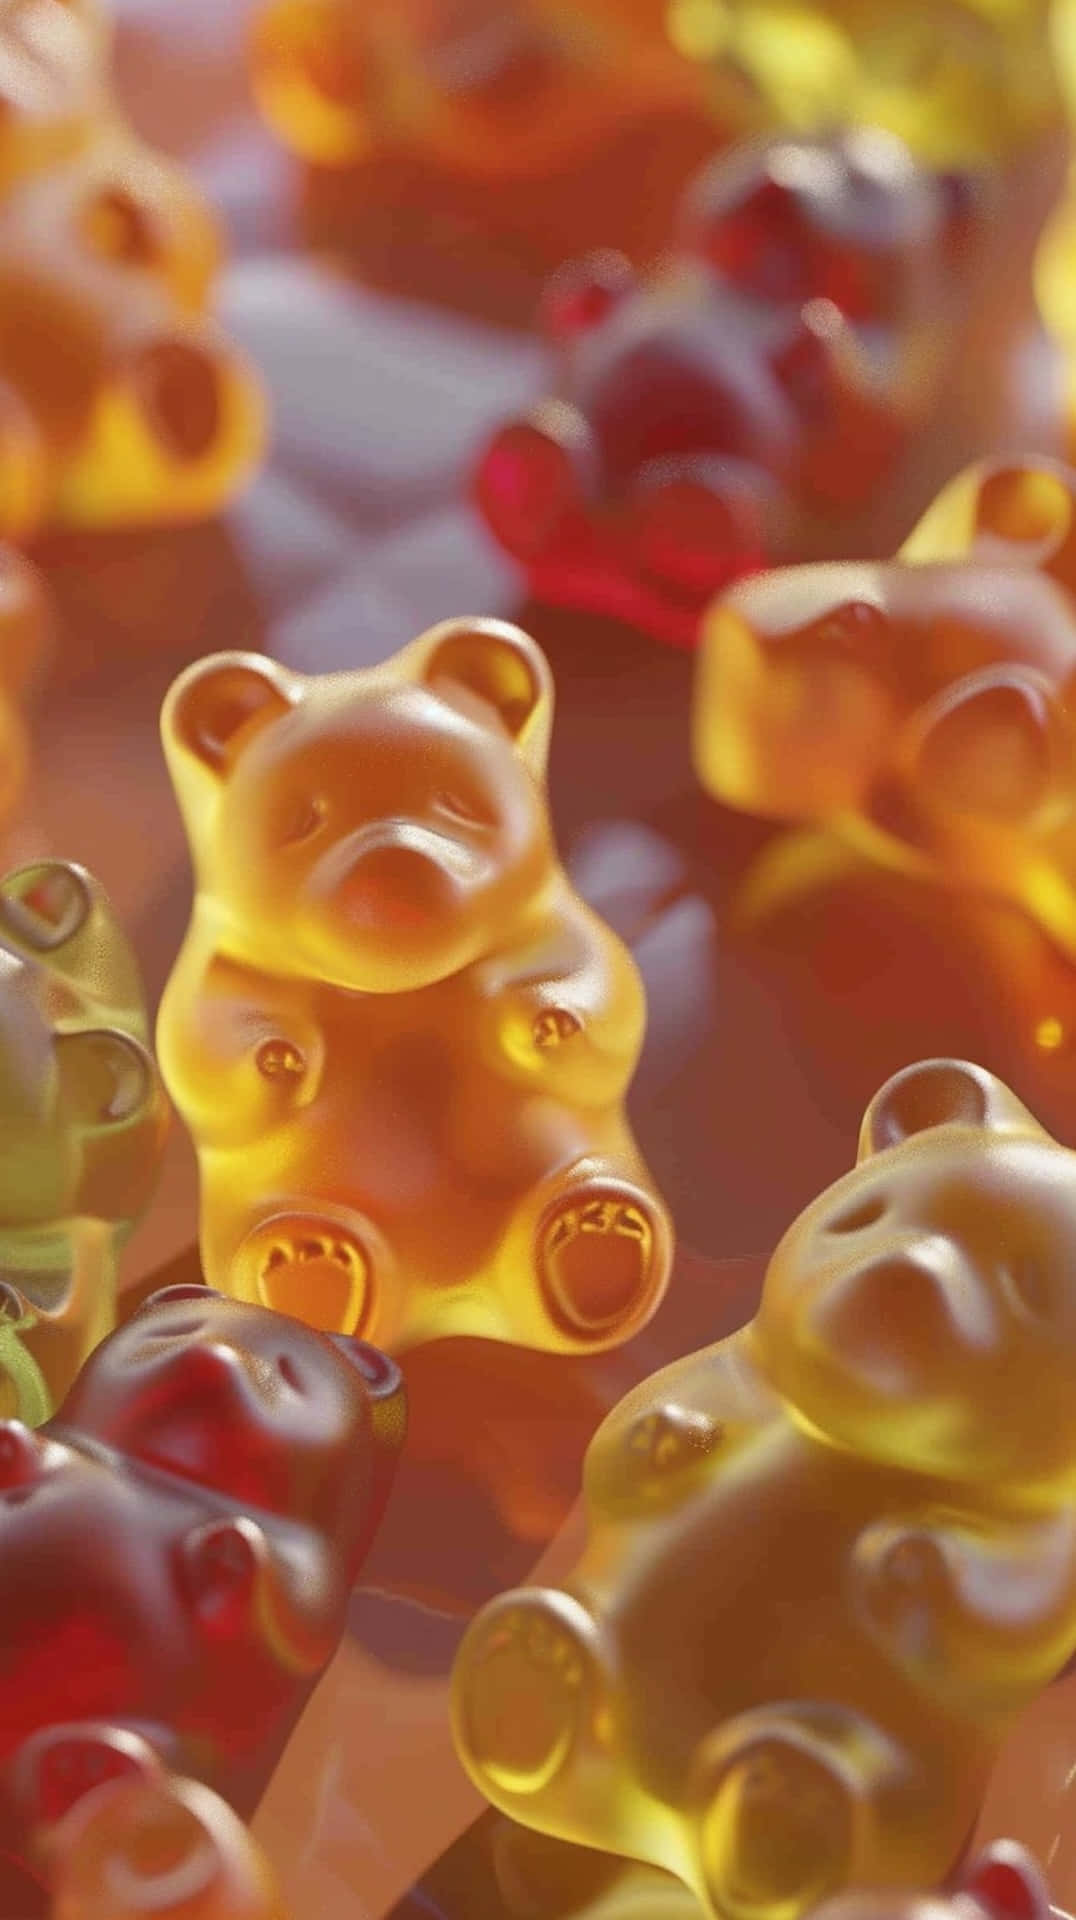 Colorful Gummy Bears Candy Texture Wallpaper